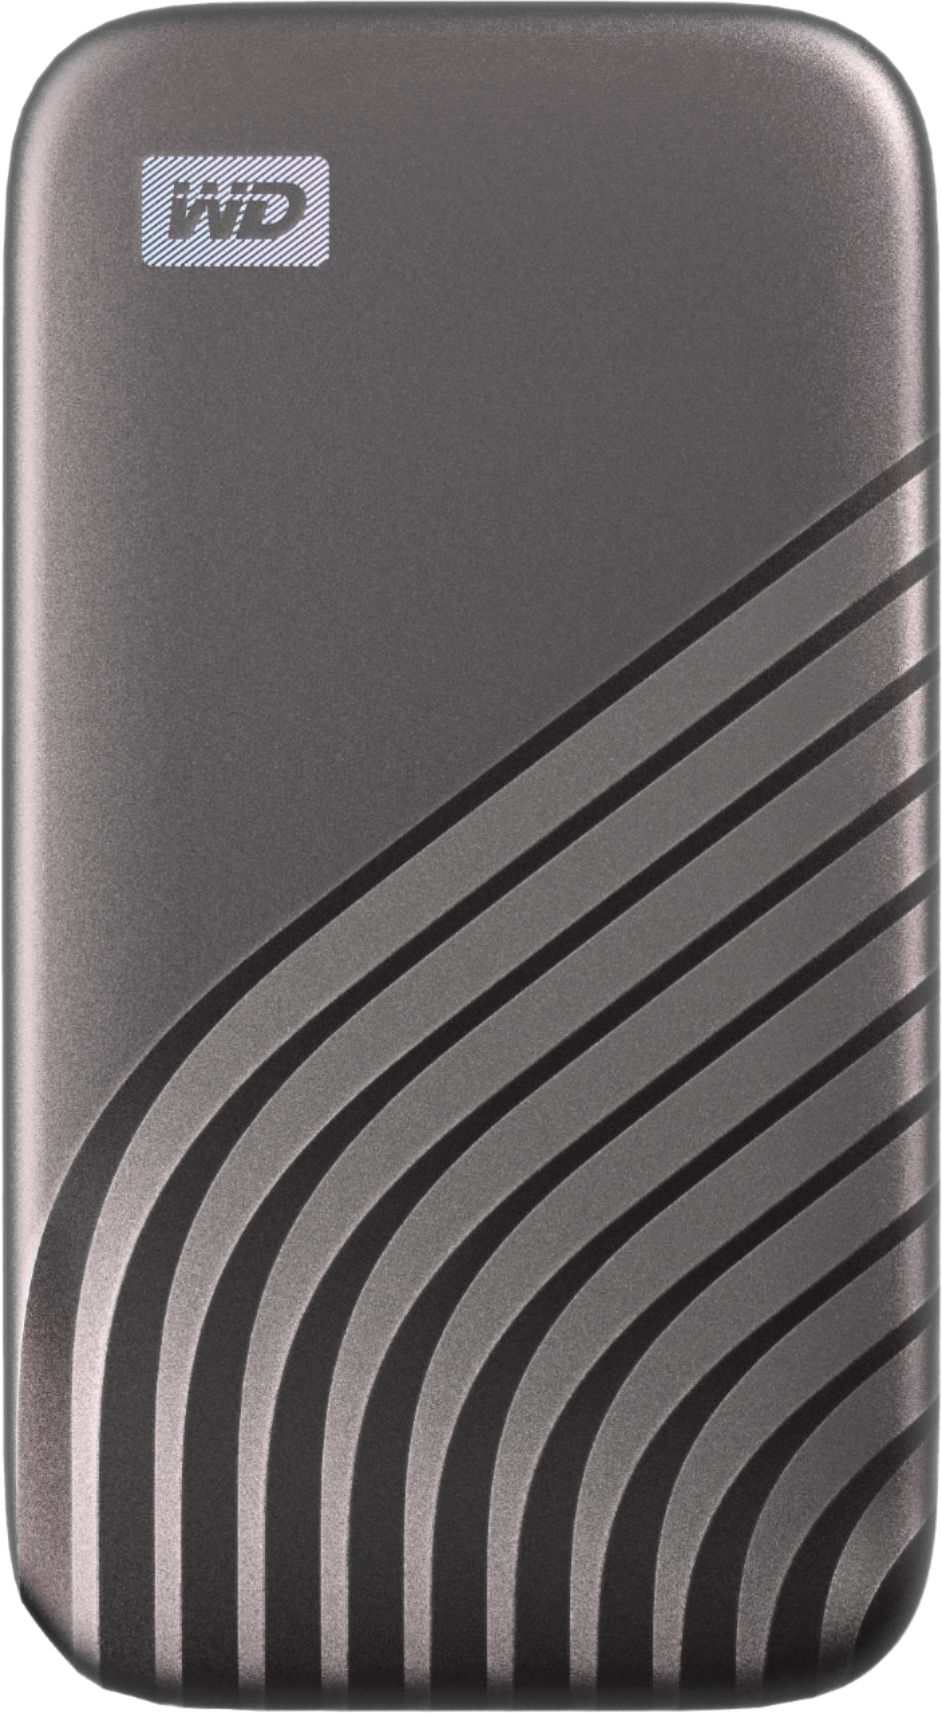 WD My Passport 2TB External Type-C Portable SSD Space Gray WDBAGF0020BGY-WESN Best